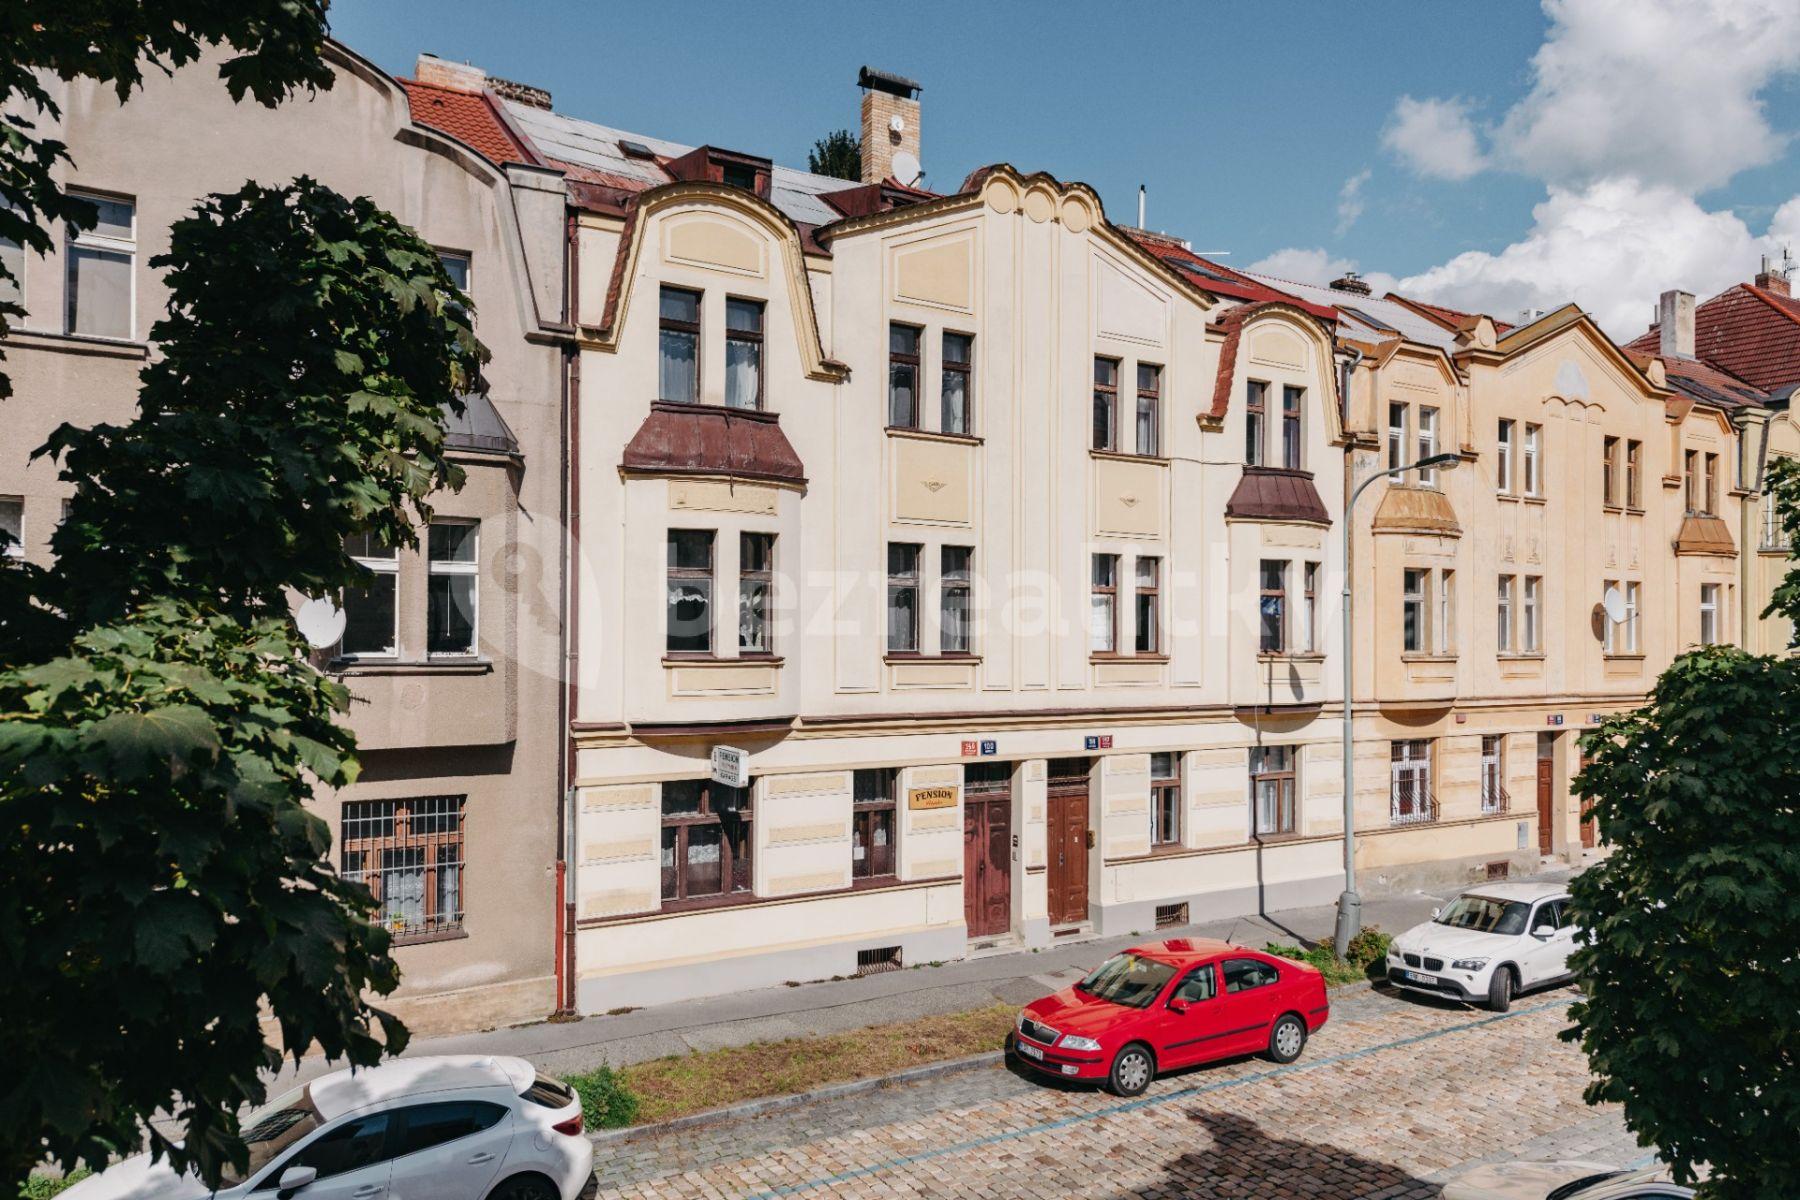 1 bedroom with open-plan kitchen flat for sale, 41 m², Na Petynce, Prague, Prague